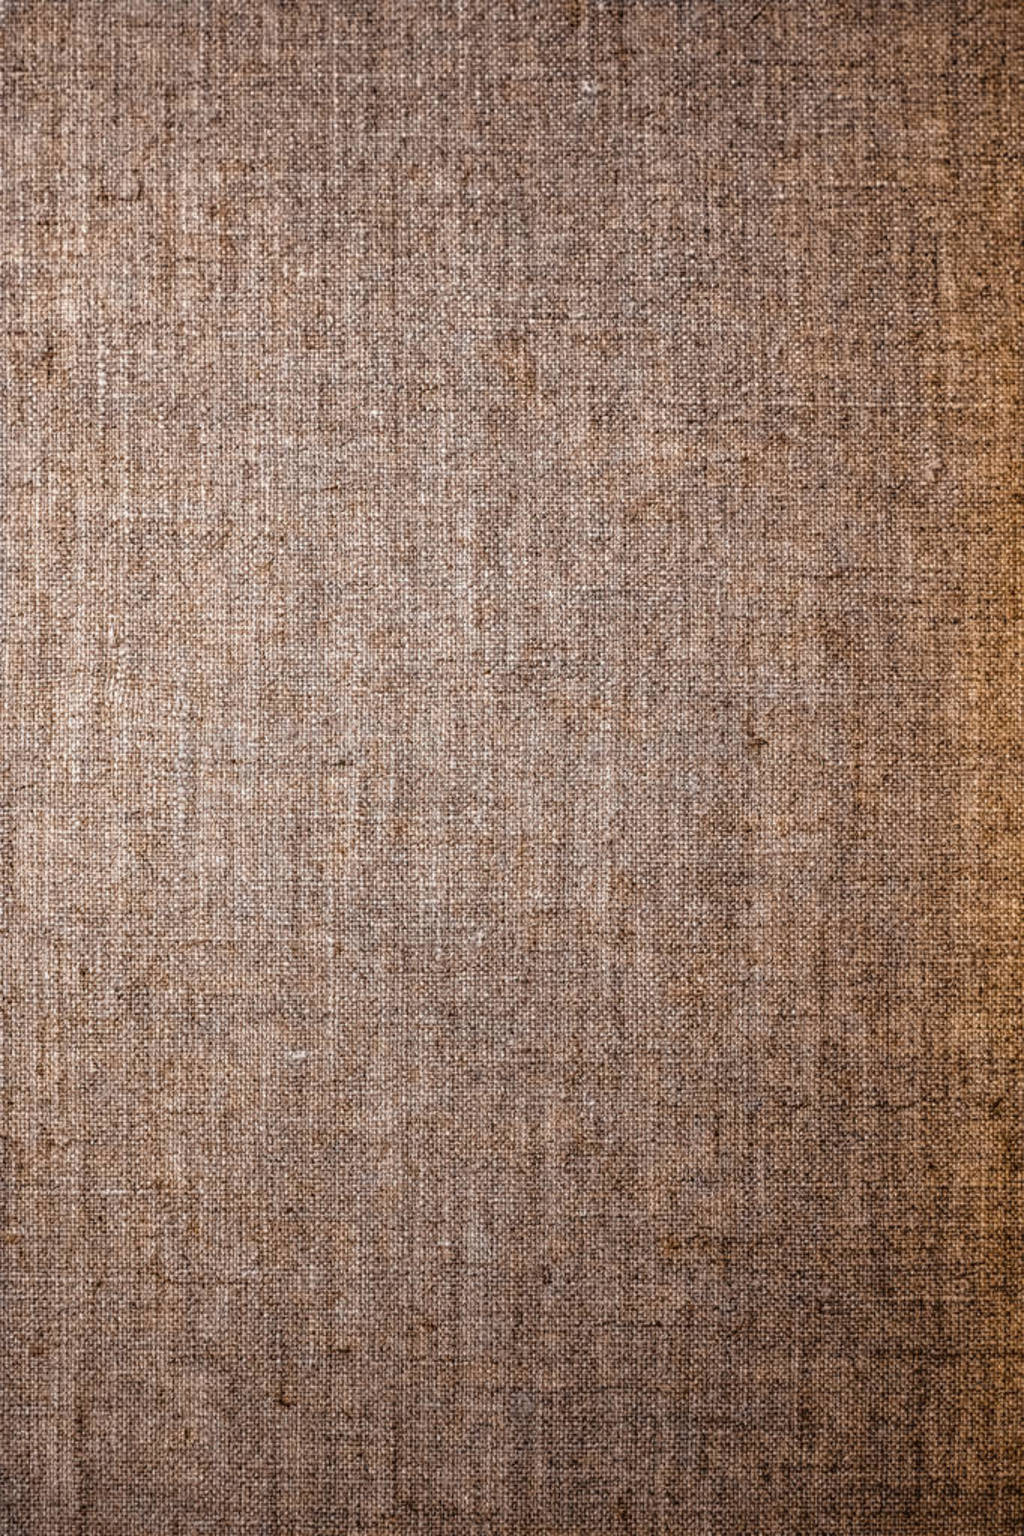 Decorative brown linen fabric textured background for interior,